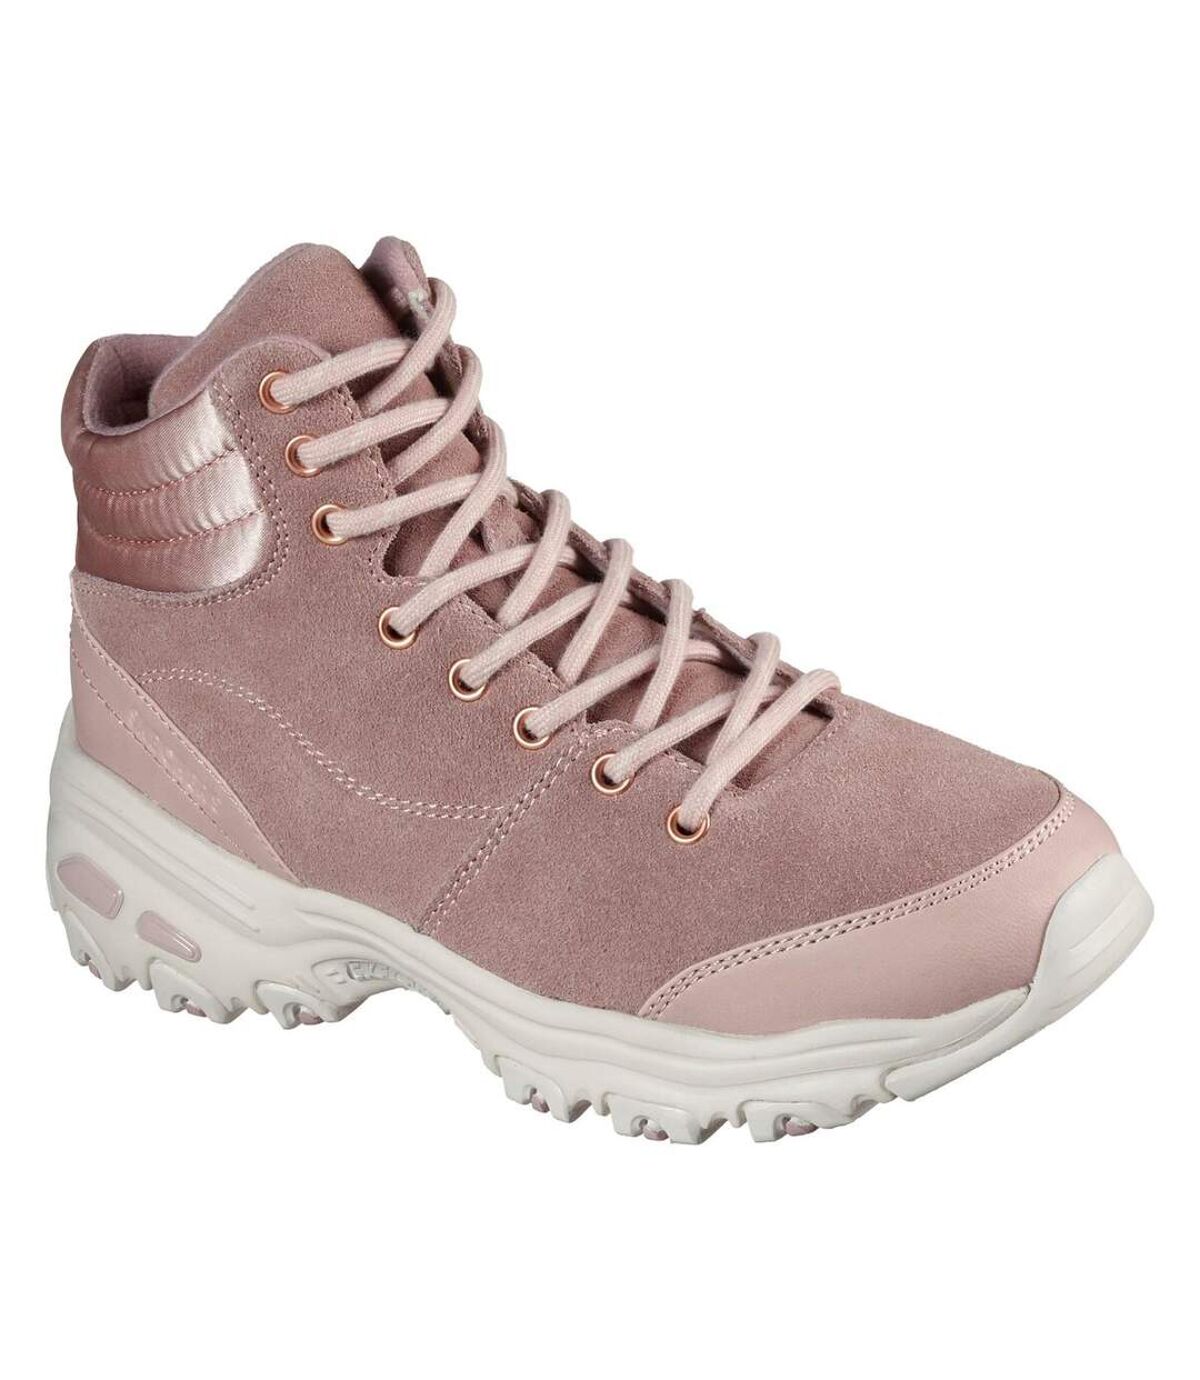 Skechers Womens/Ladies D´Lites New Chills Leather Ankle Boots (Blush Pink) - UTFS8691